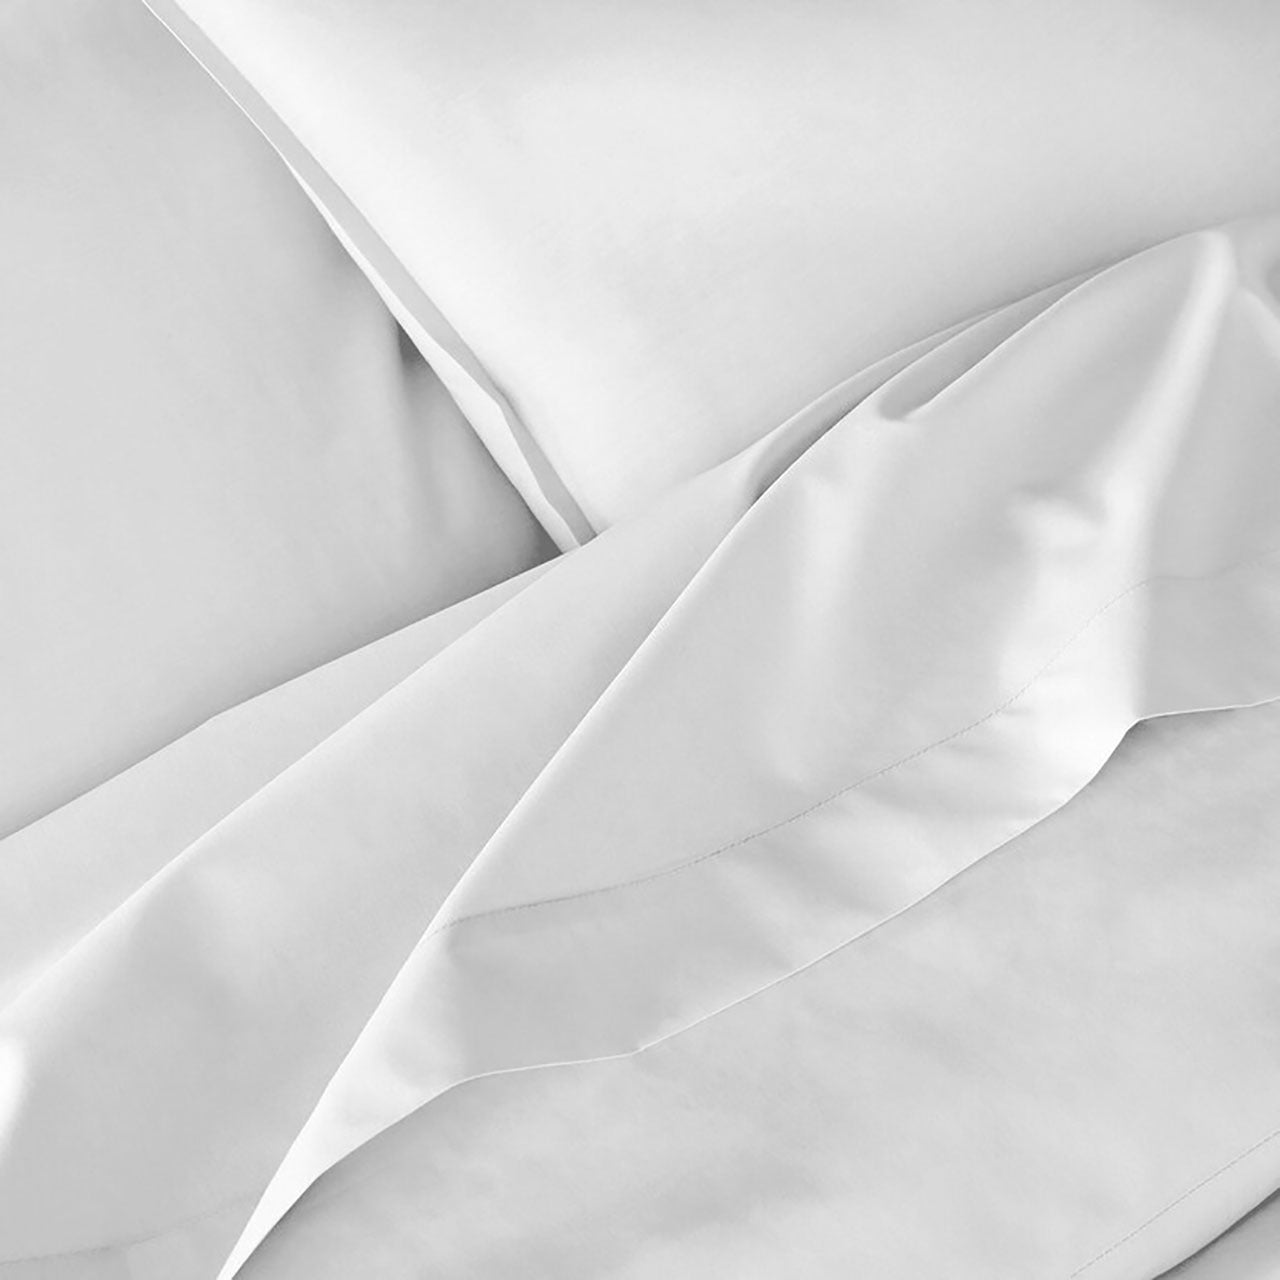 EUQIFAH Cotton Sateen Bed Sheet Set -Soft Silky Shiny - Luxurious Comfort Bedding Fade & Shrink Resistant -T600-4 Pieces (Queen Size) White)